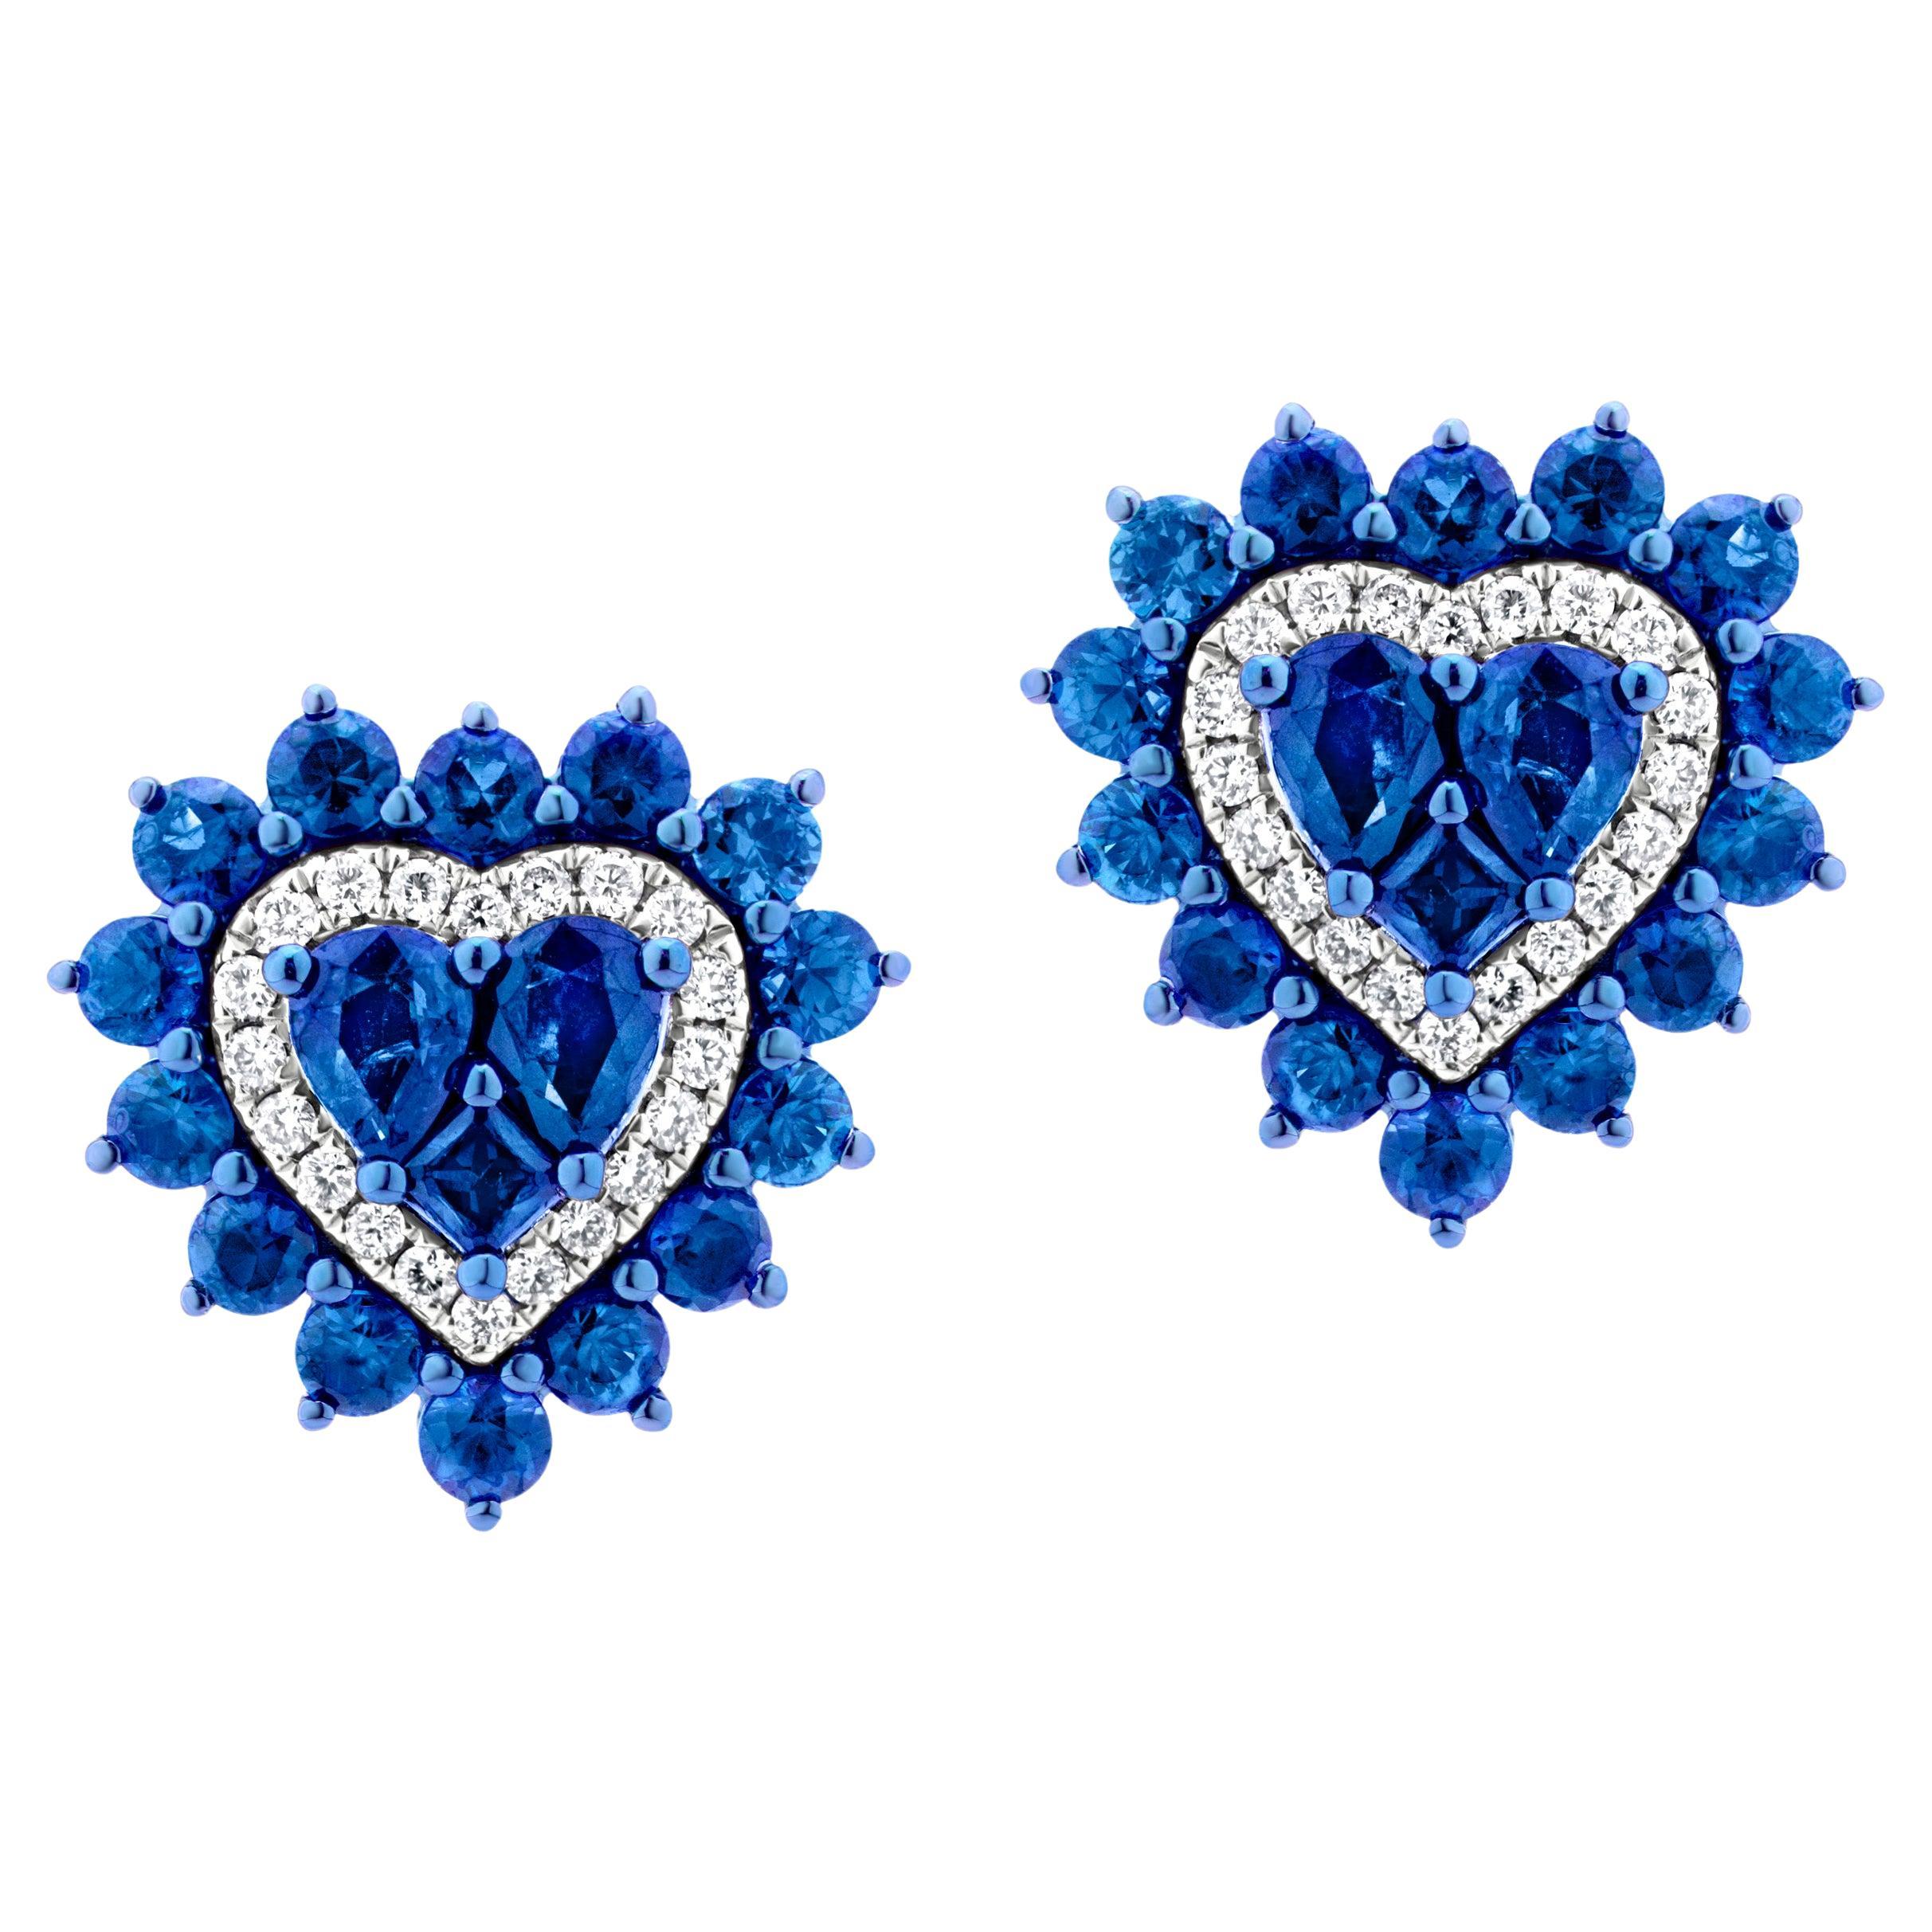 Luxle 2.84 Cttw. Sapphire and Diamond Heart Stud Earring in 18k White Gold 